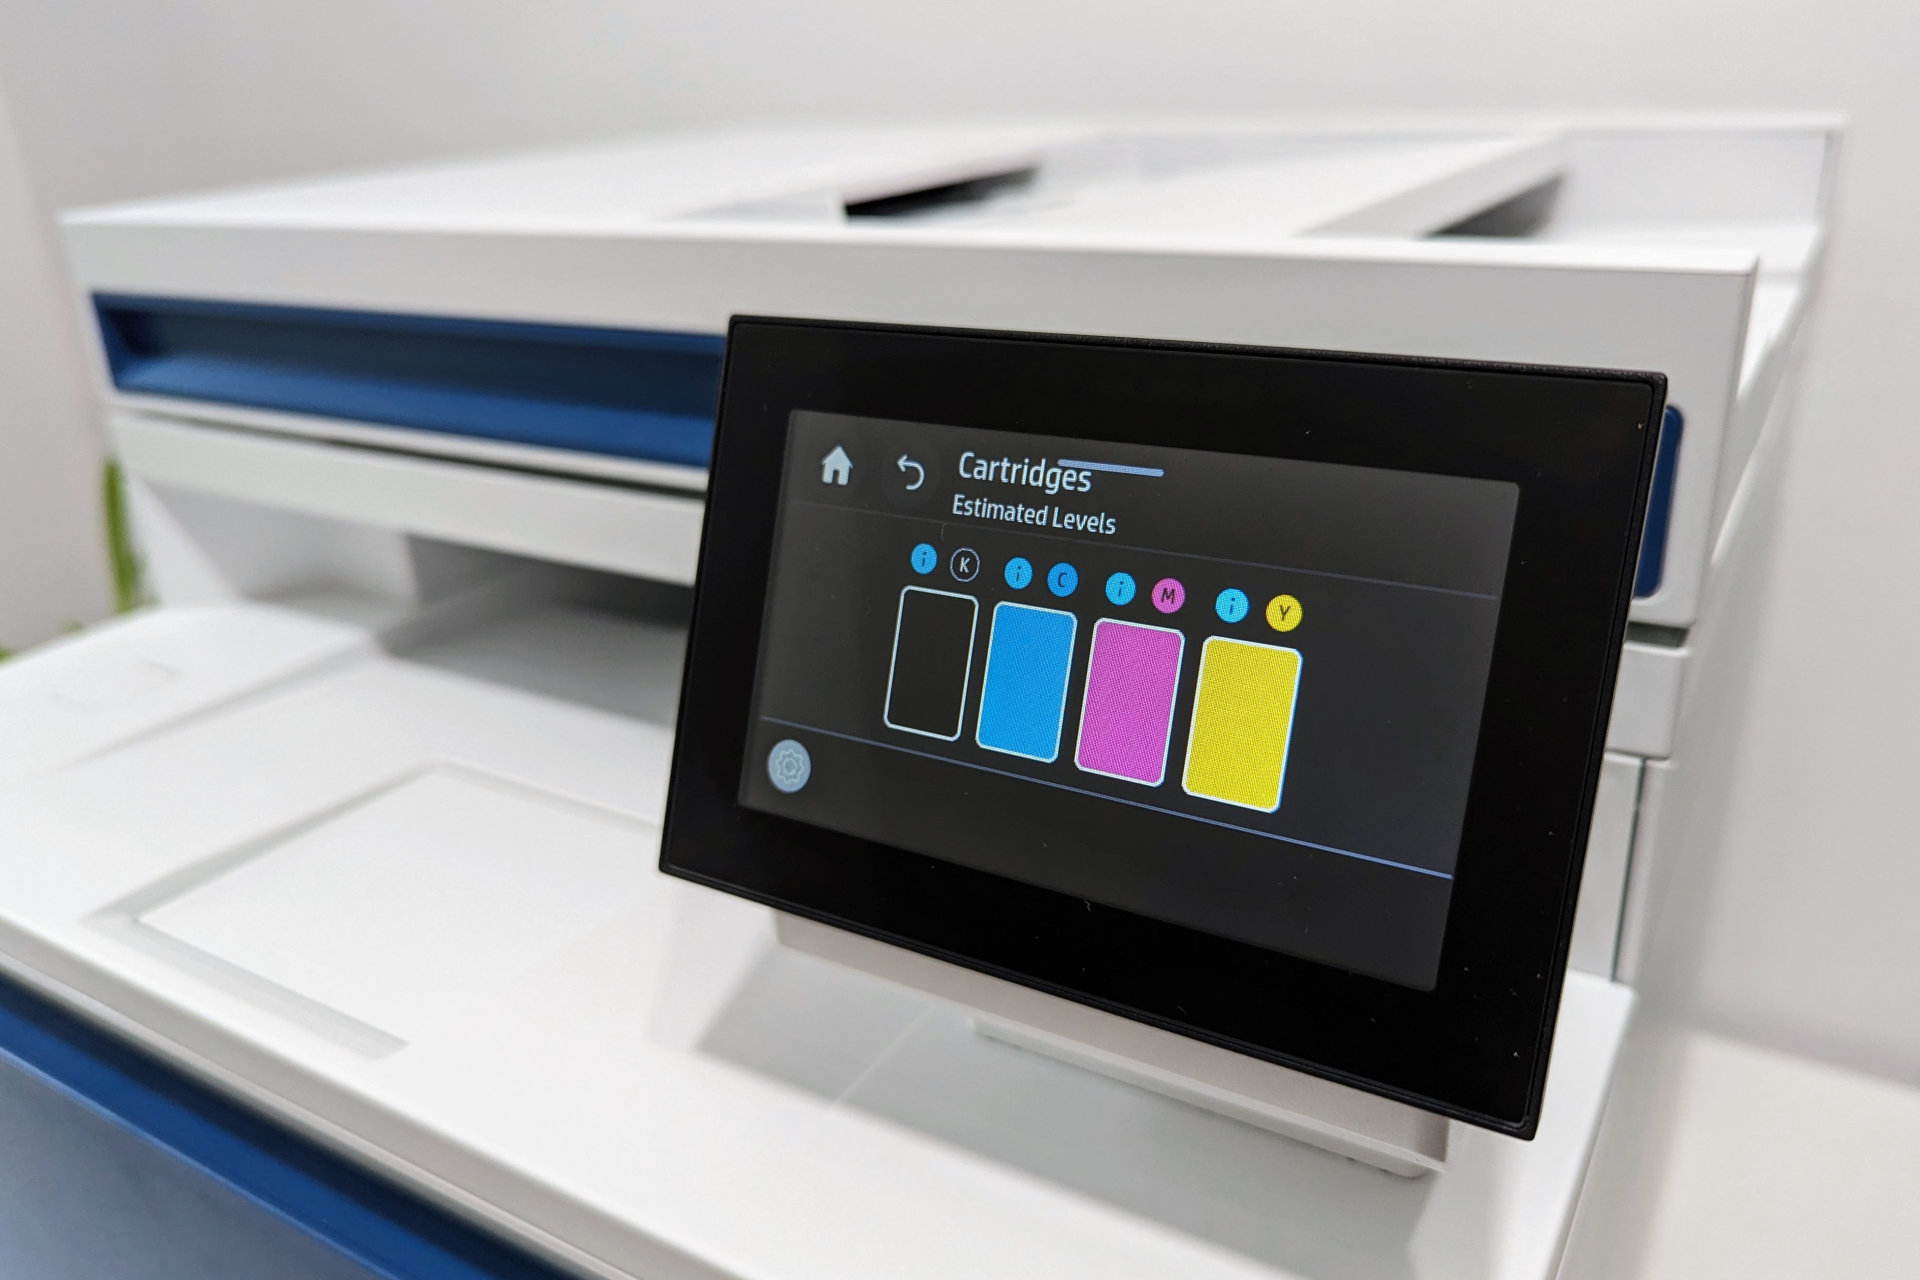 Types Of Printers: Pros, Cons, Uses & More - CartridgesDirect